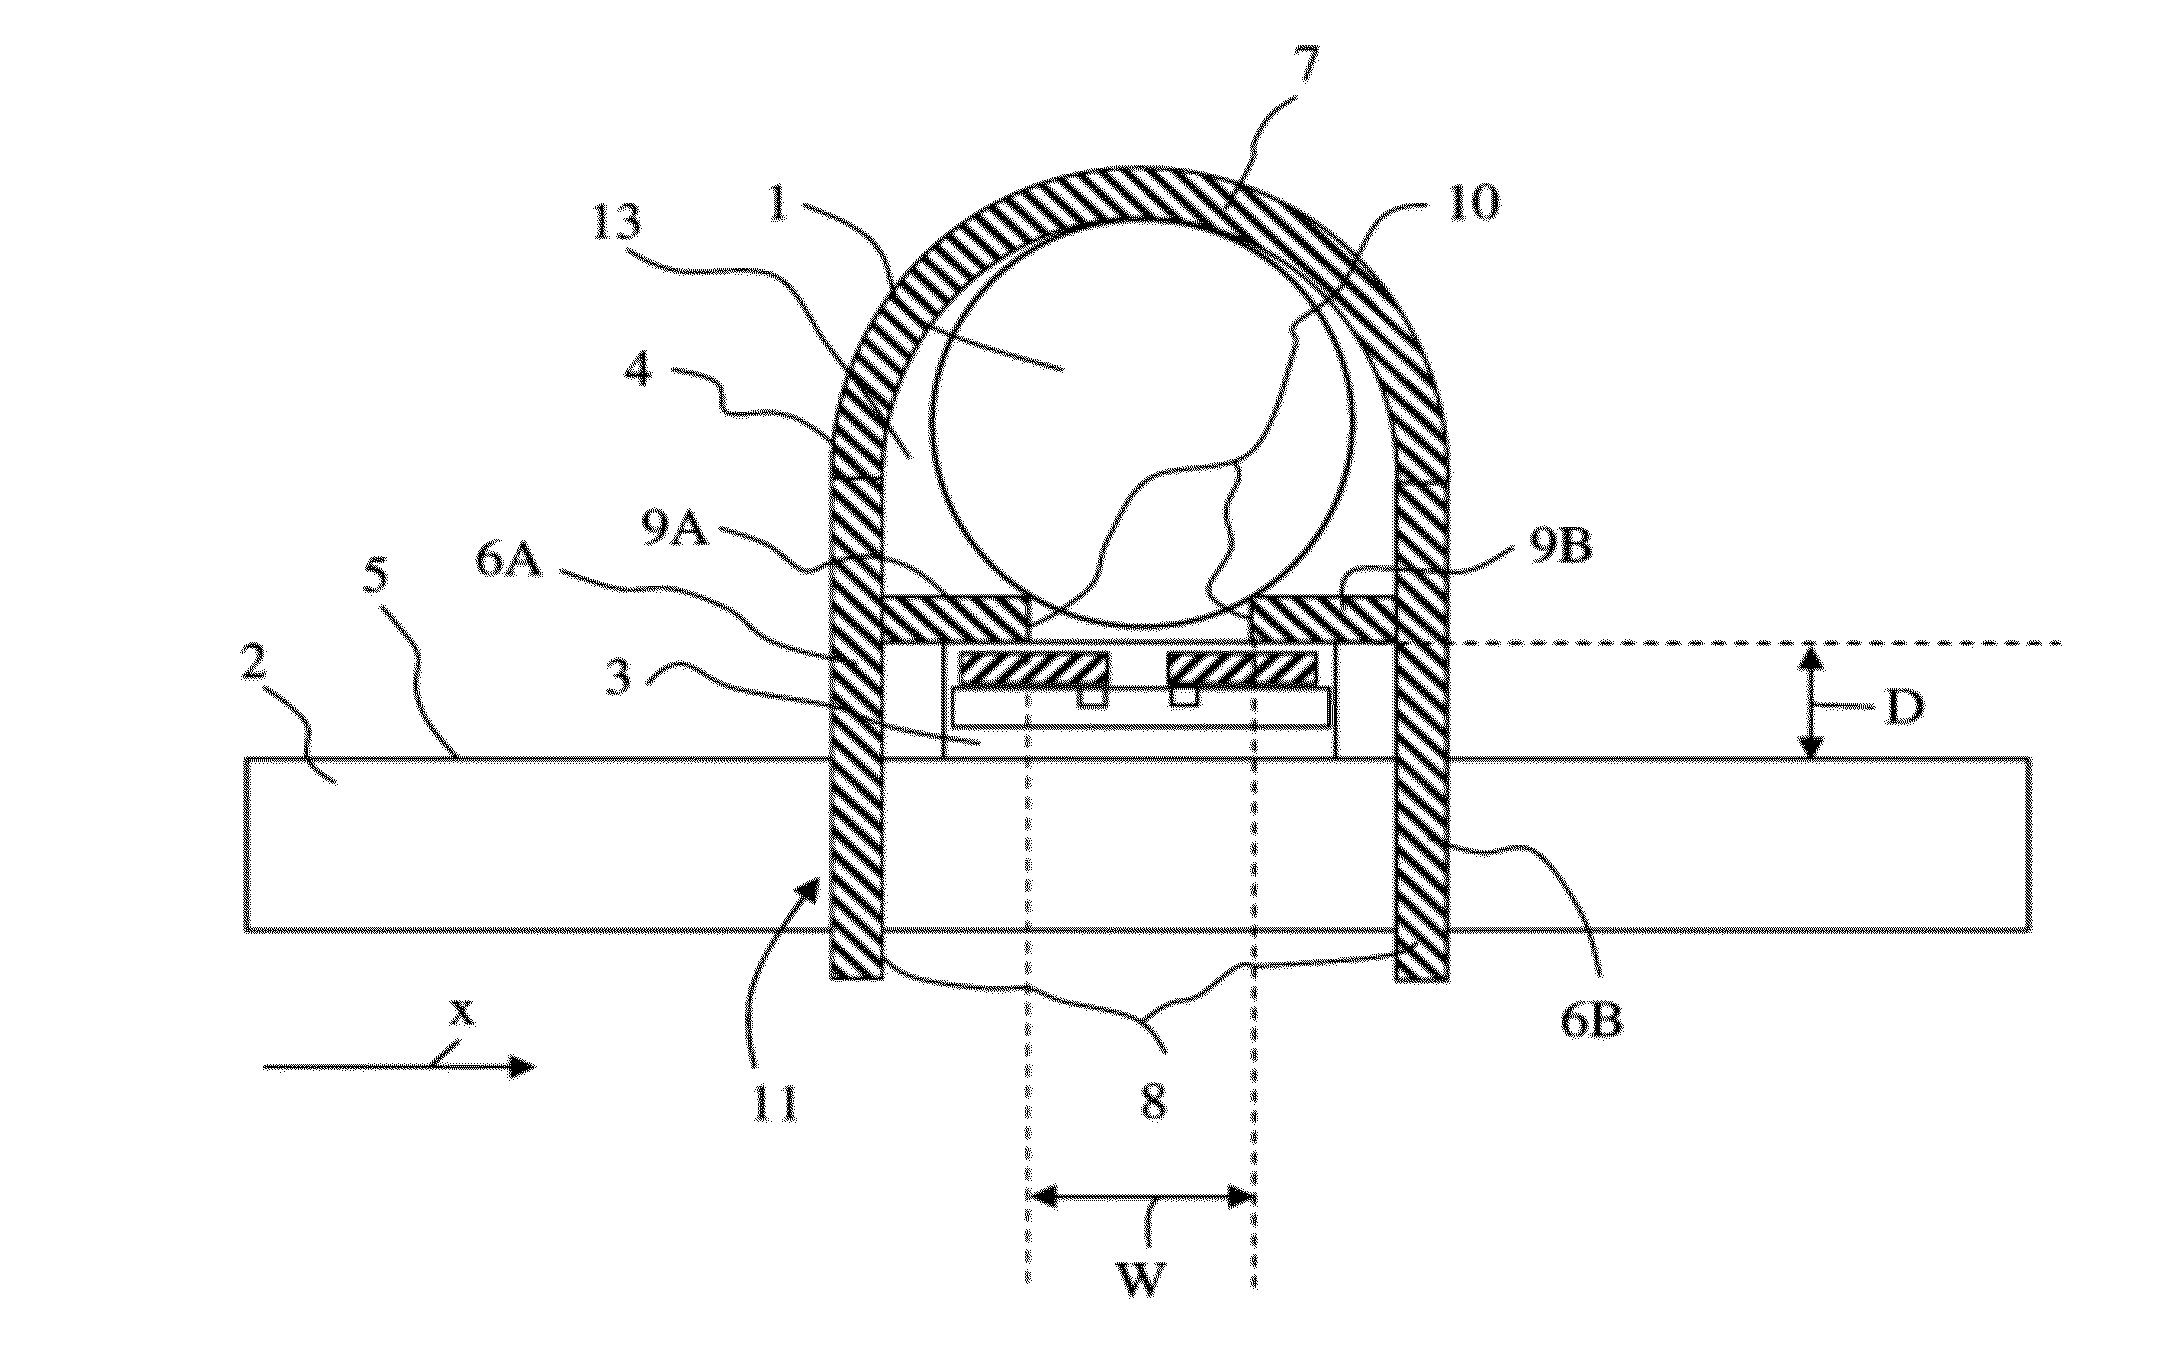 Device for measuring a current flowing through an electric cable